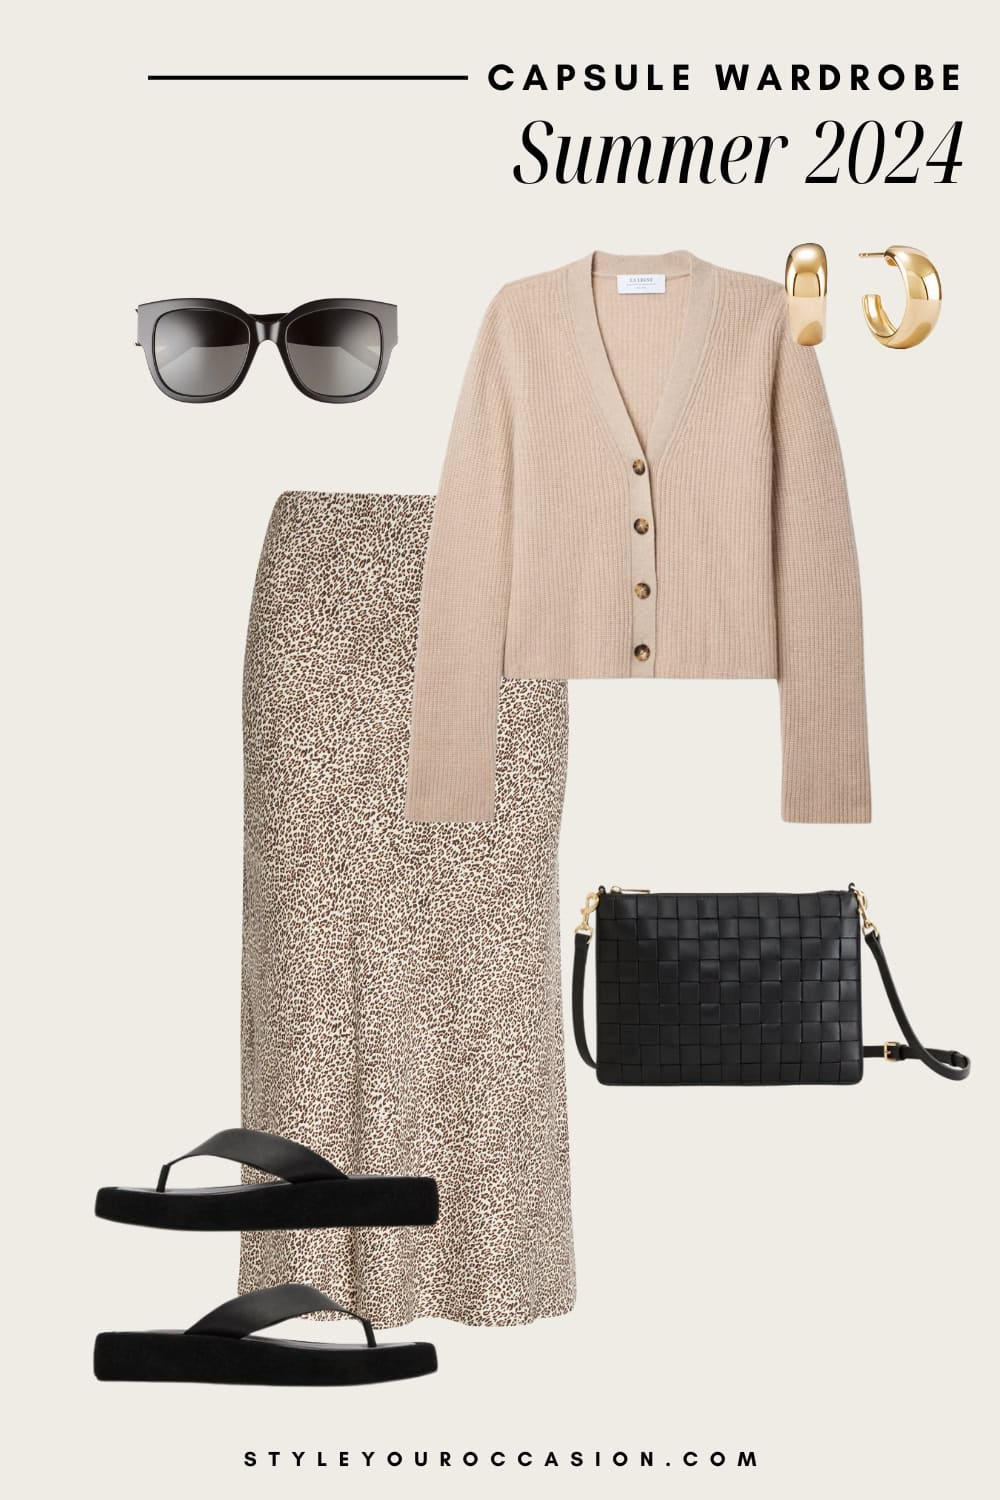 outfit graphic with a beige knit cardigan, leopard print midi skirt, black sandals, and black crossbody bag for summer